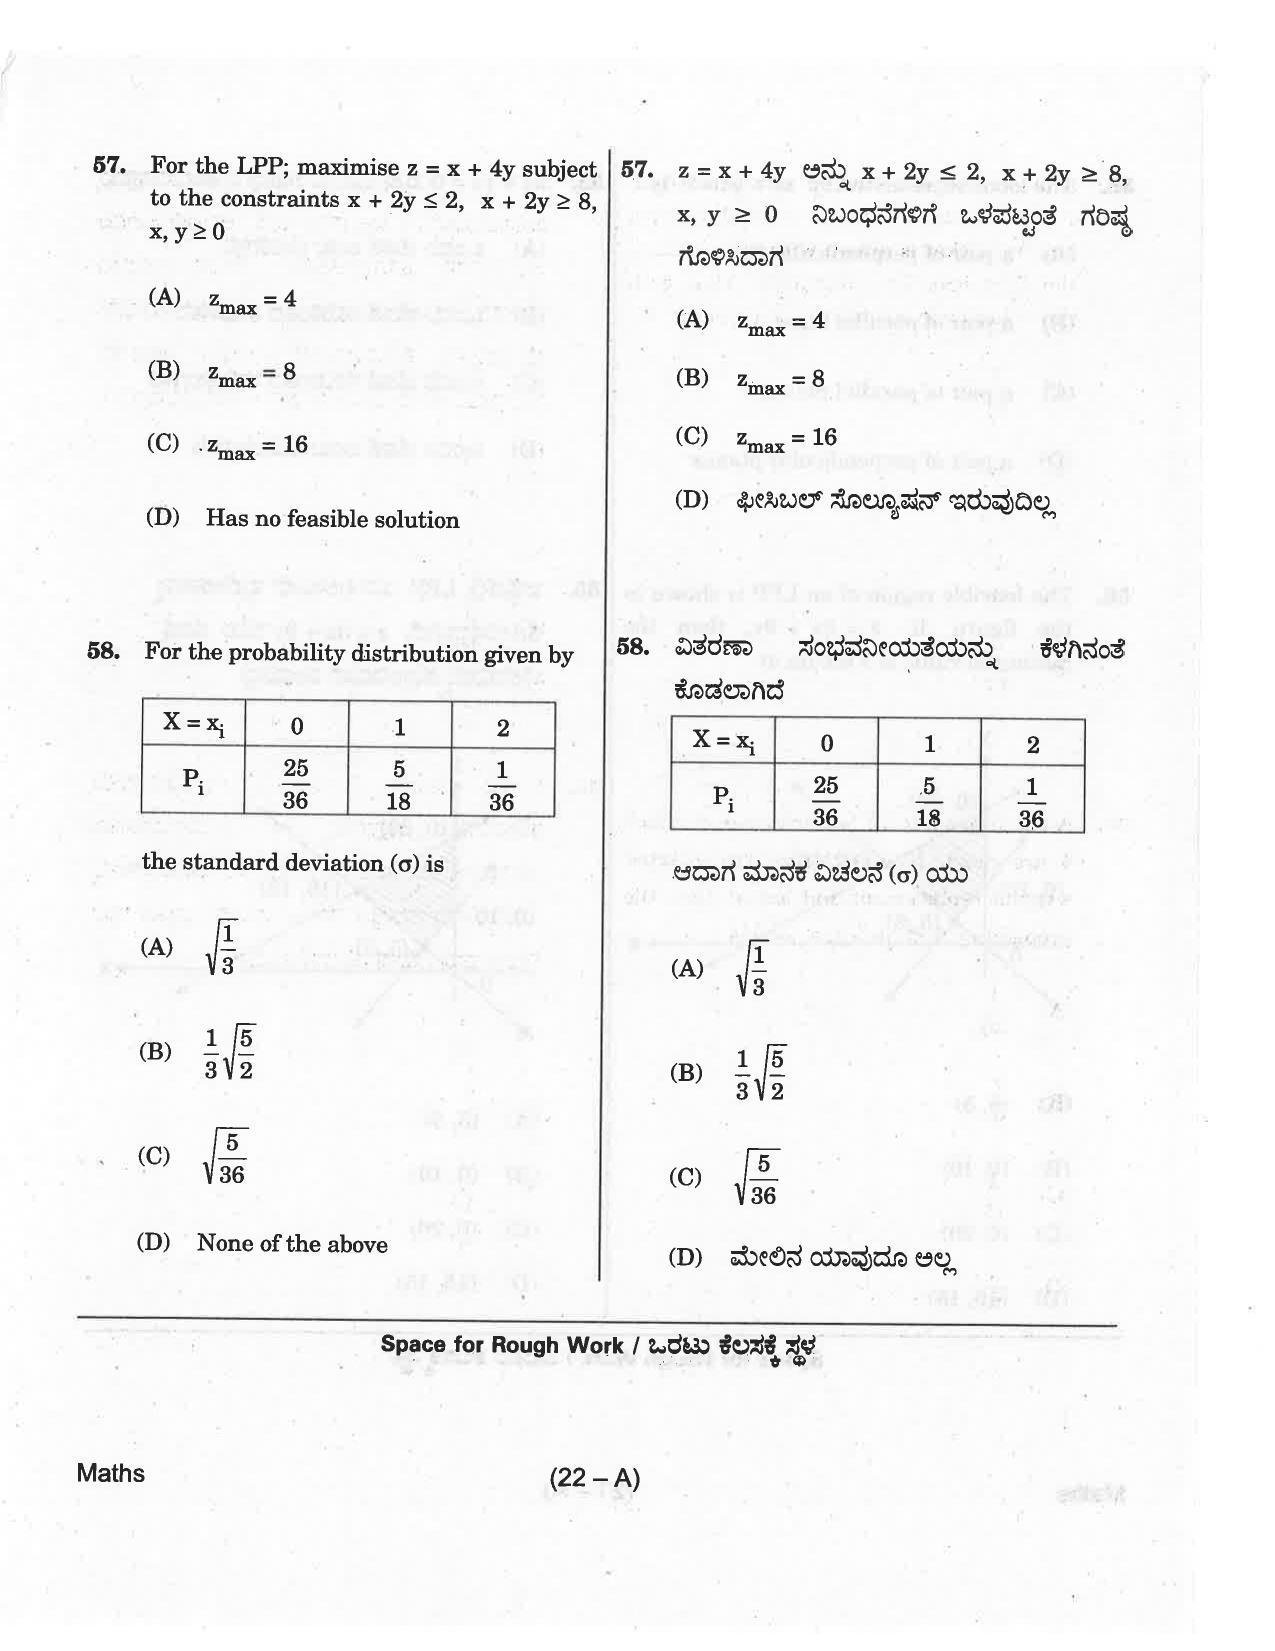 KCET Mathematics 2018 Question Papers - Page 22